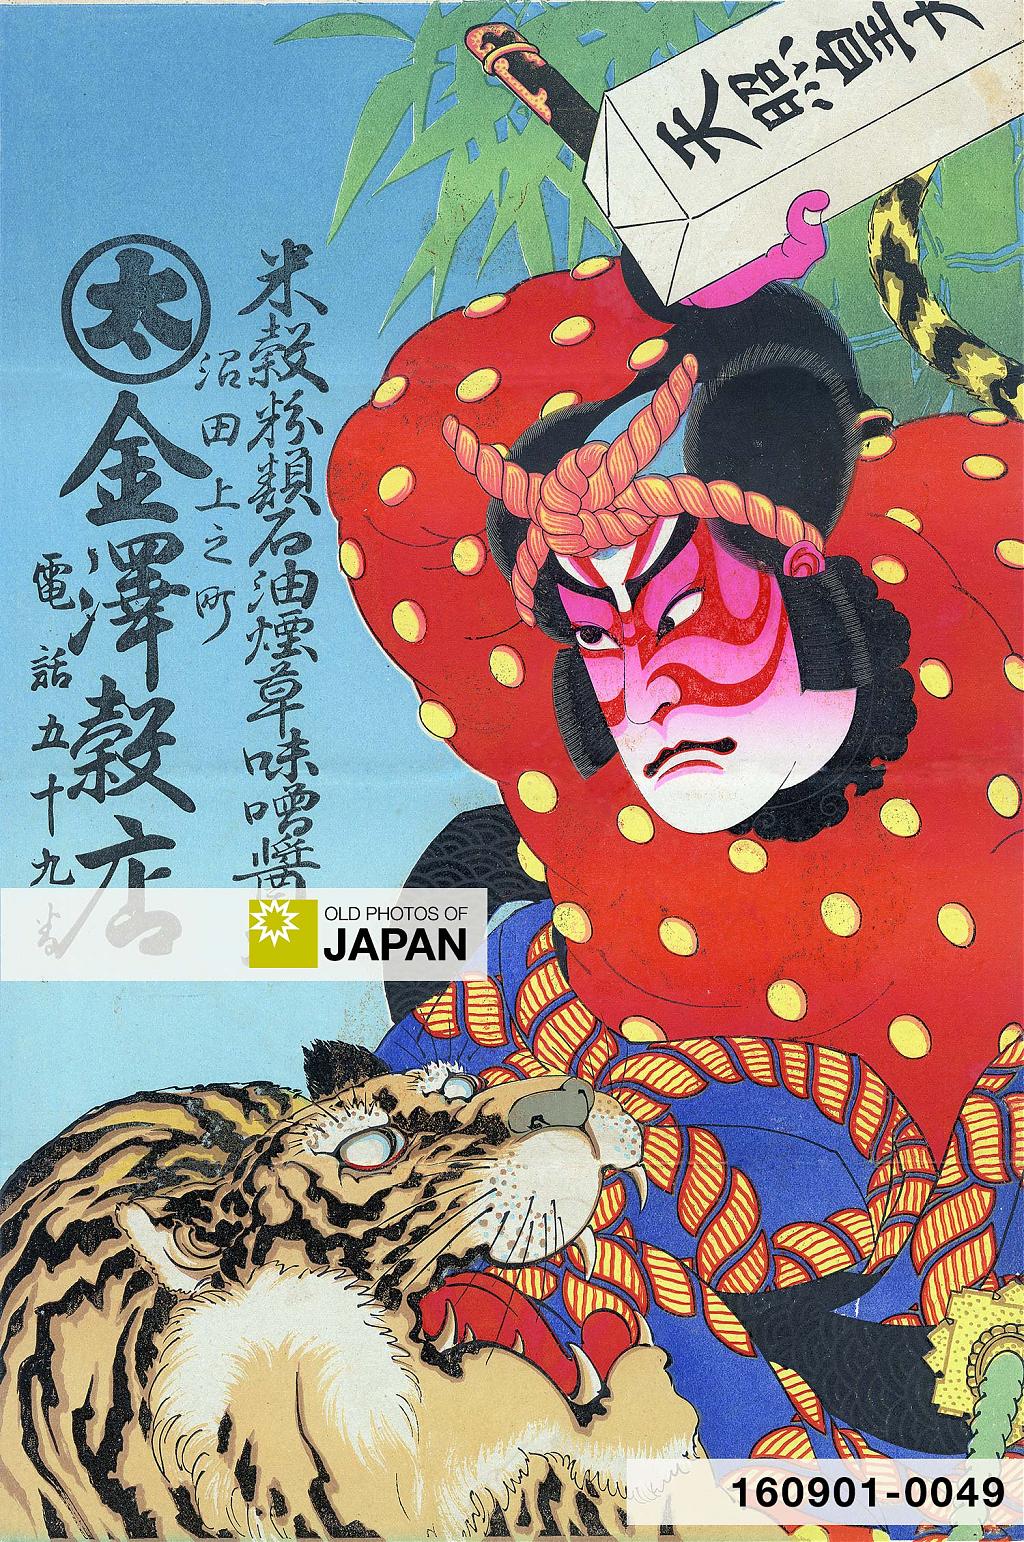 Hikifuda advertising flyer featuring a scene from the kabuki play The Battles of Coxinga